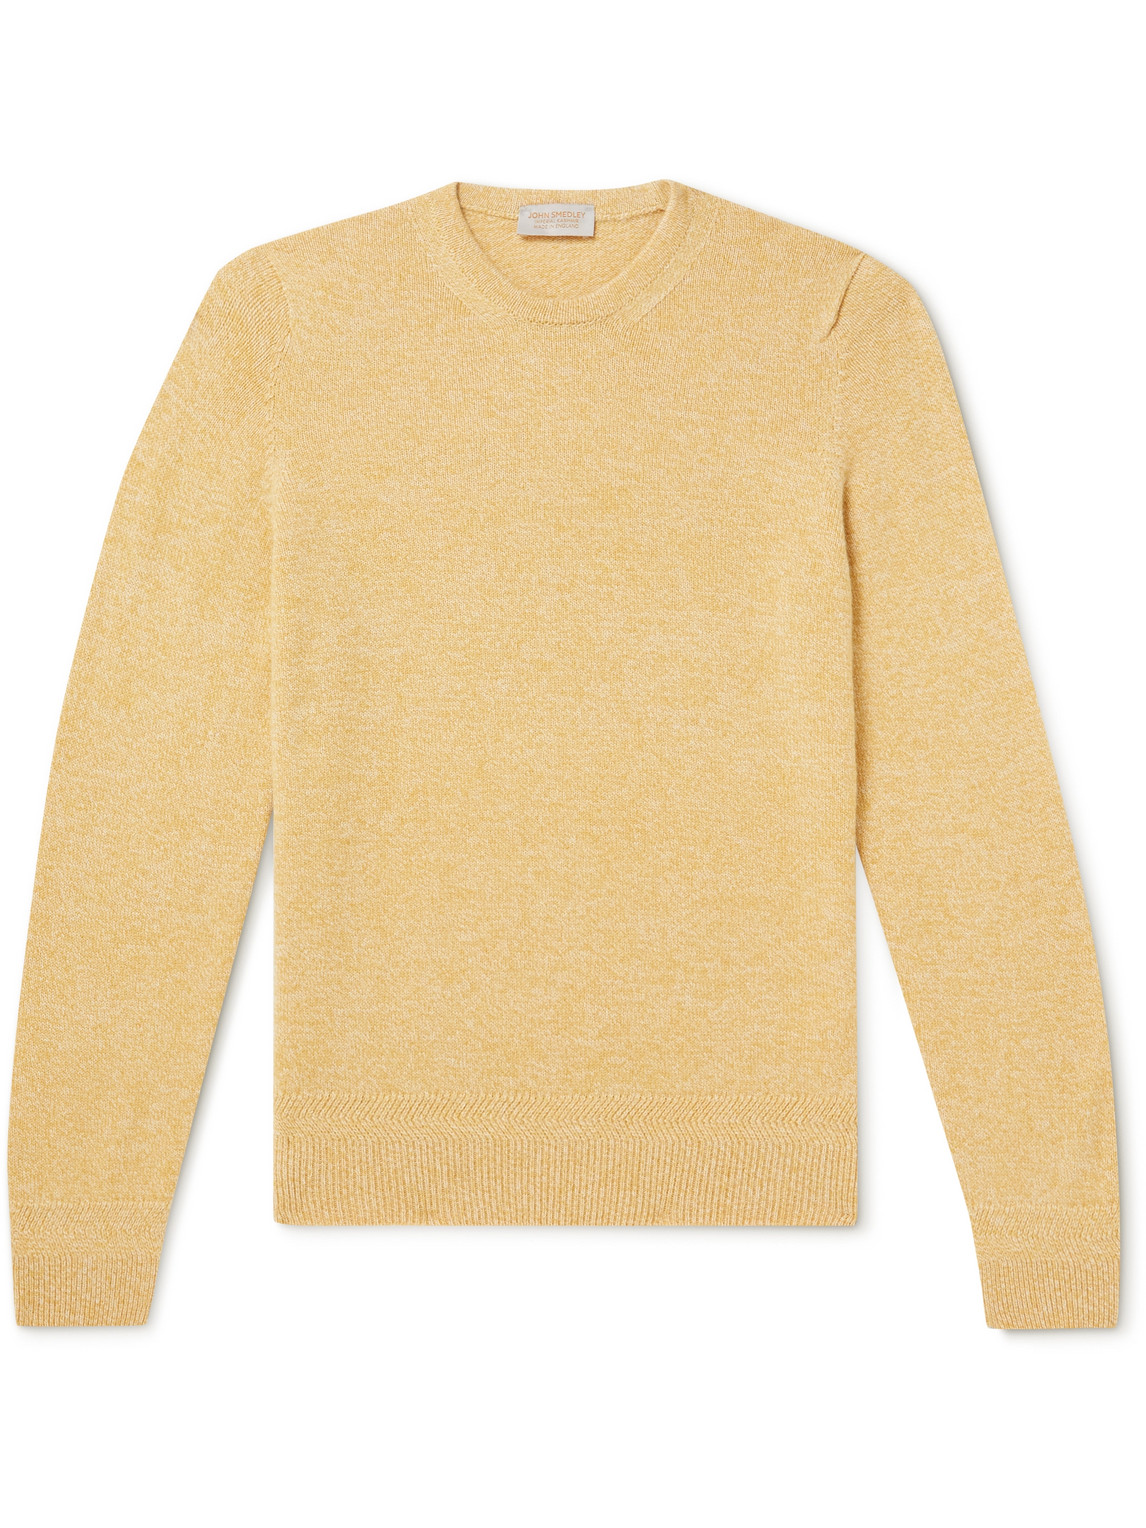 JOHN SMEDLEY NIKO RECYCLED CASHMERE AND MERINO WOOL-BLEND SWEATER